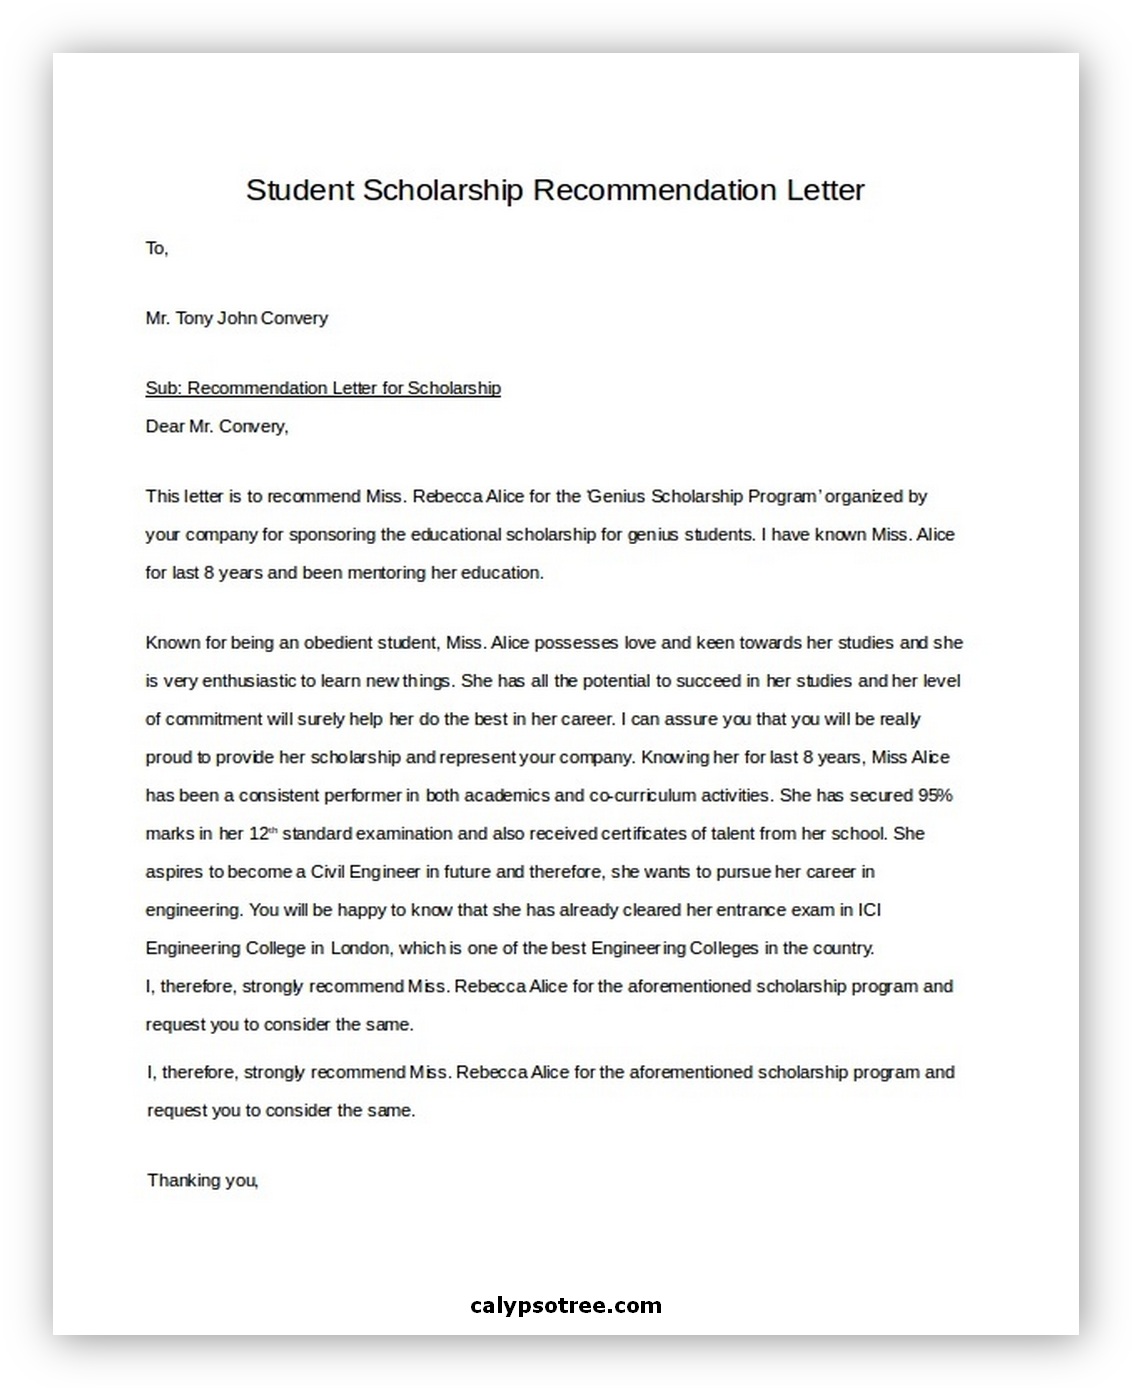 Letter of Recommendation for Student 06